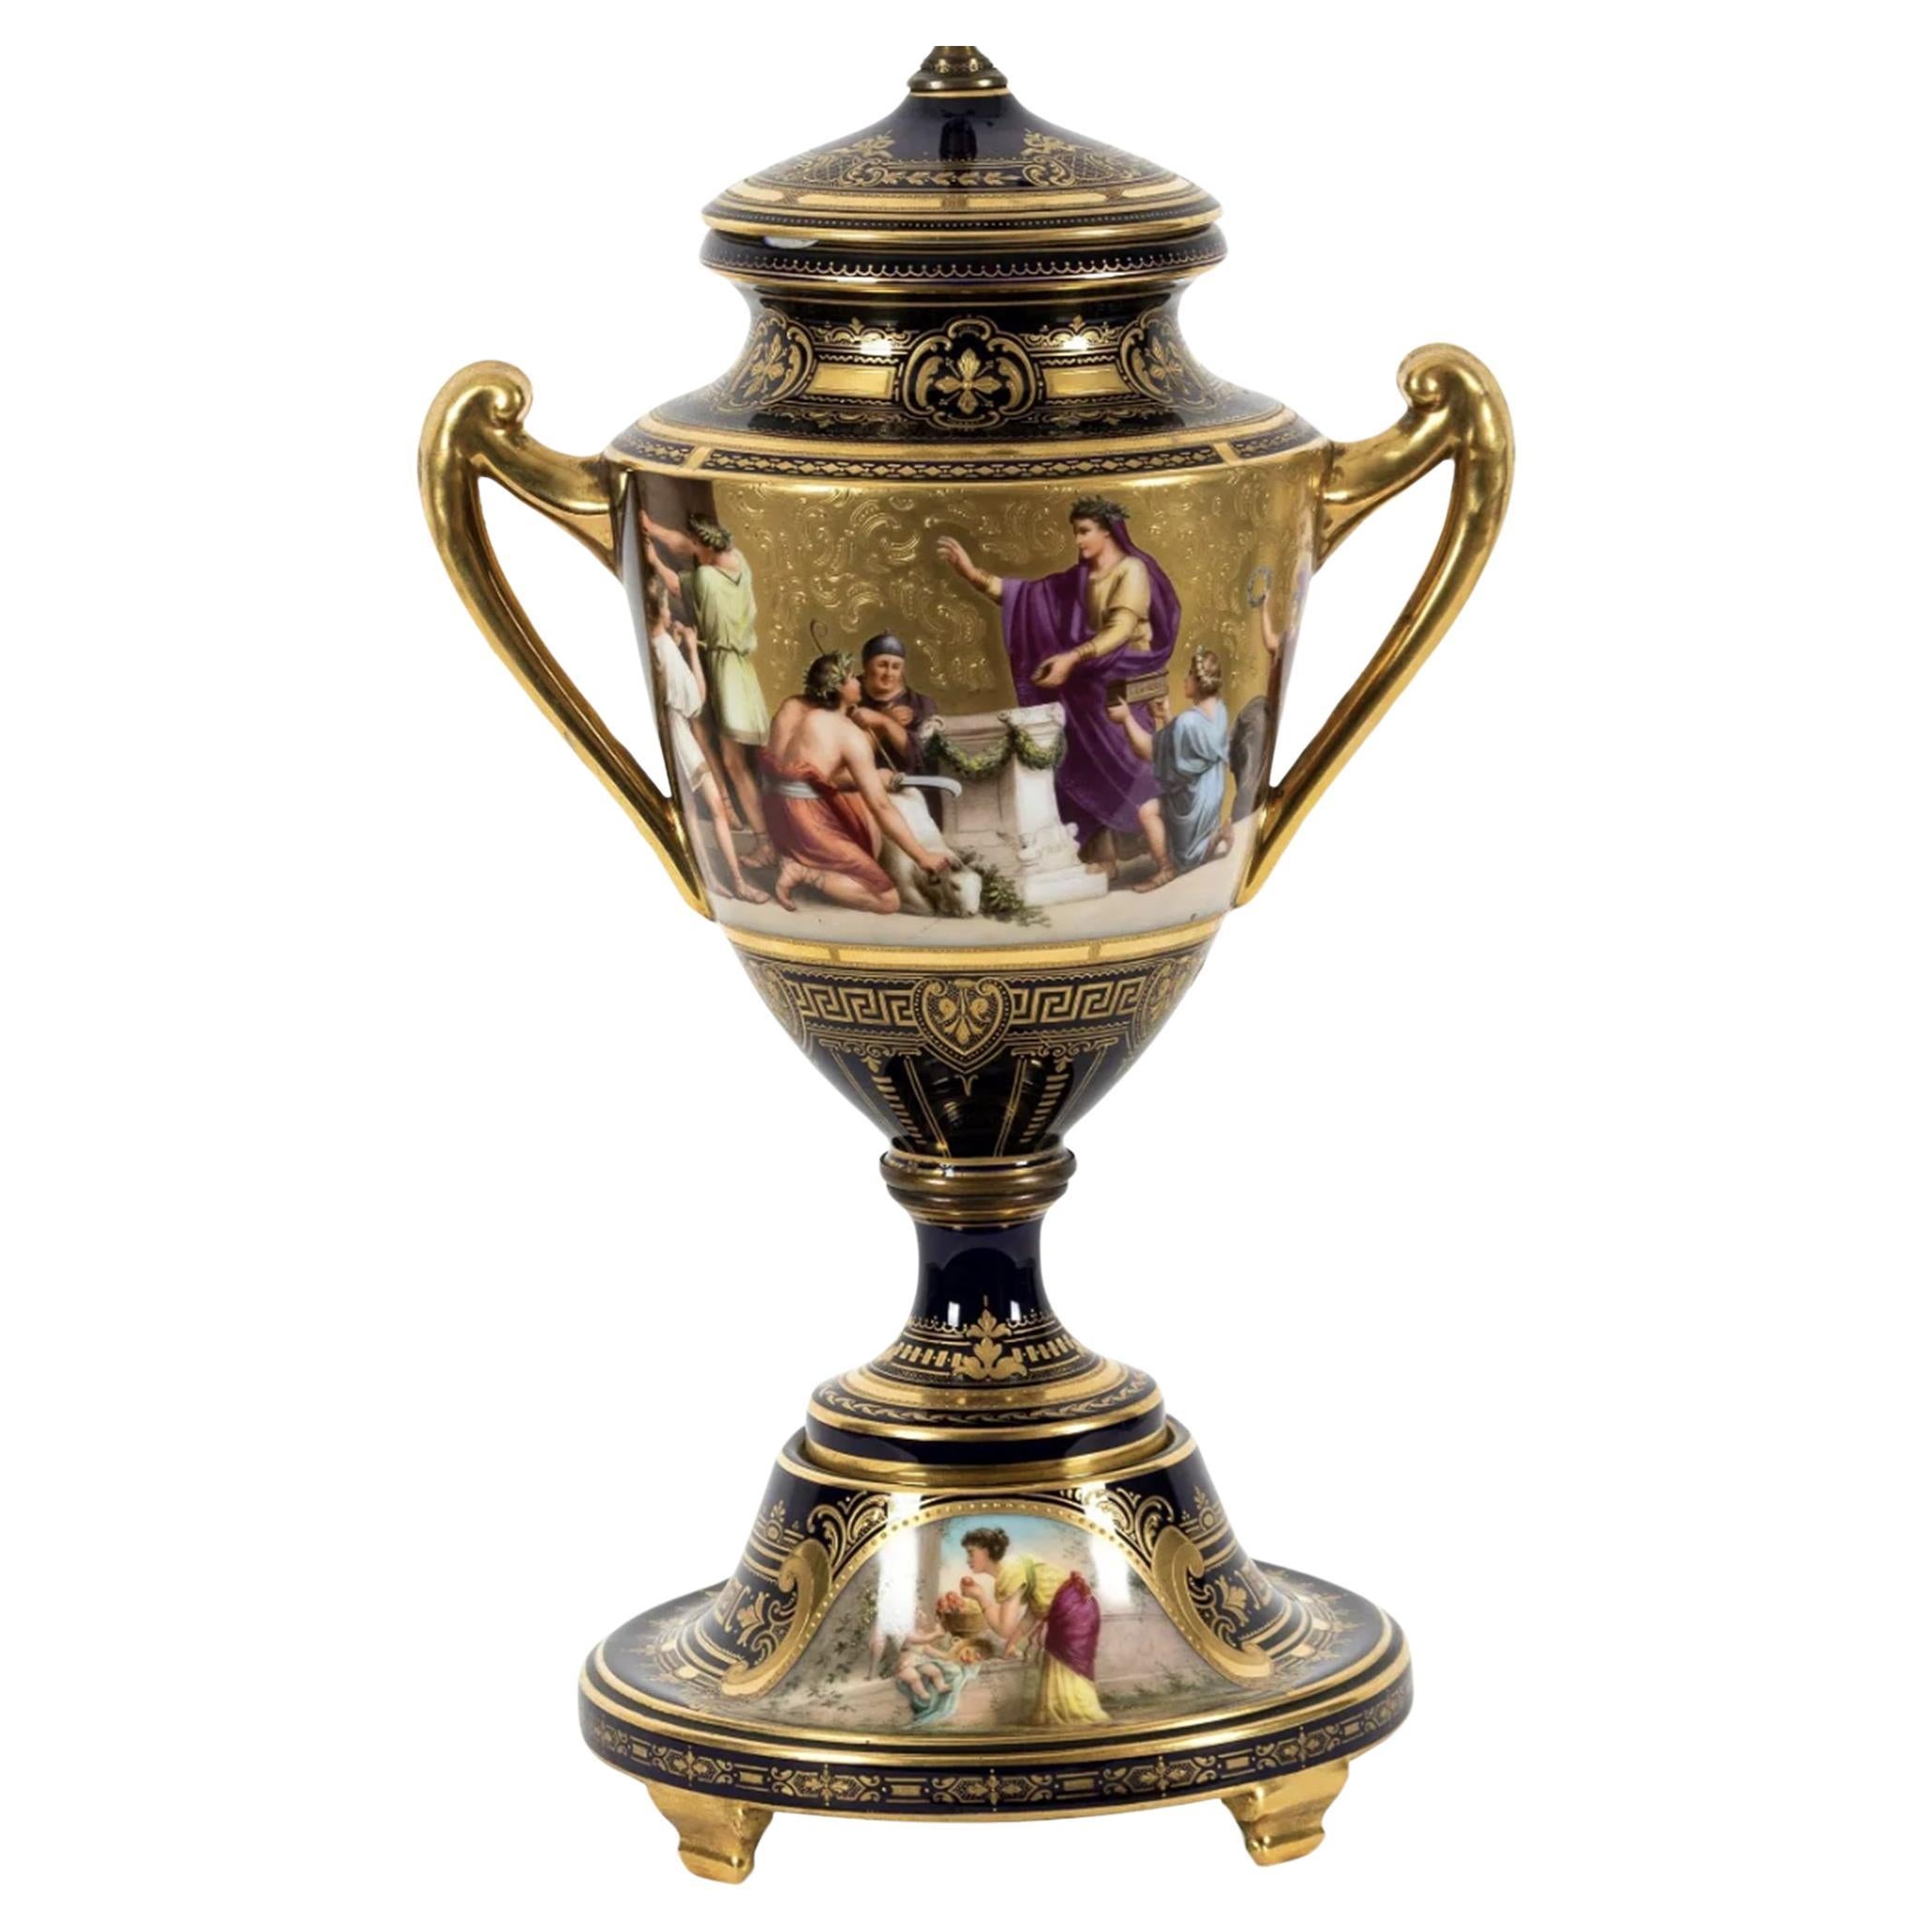 A Fine Royal Vienna Porcelain Urn, Cover and Stand 